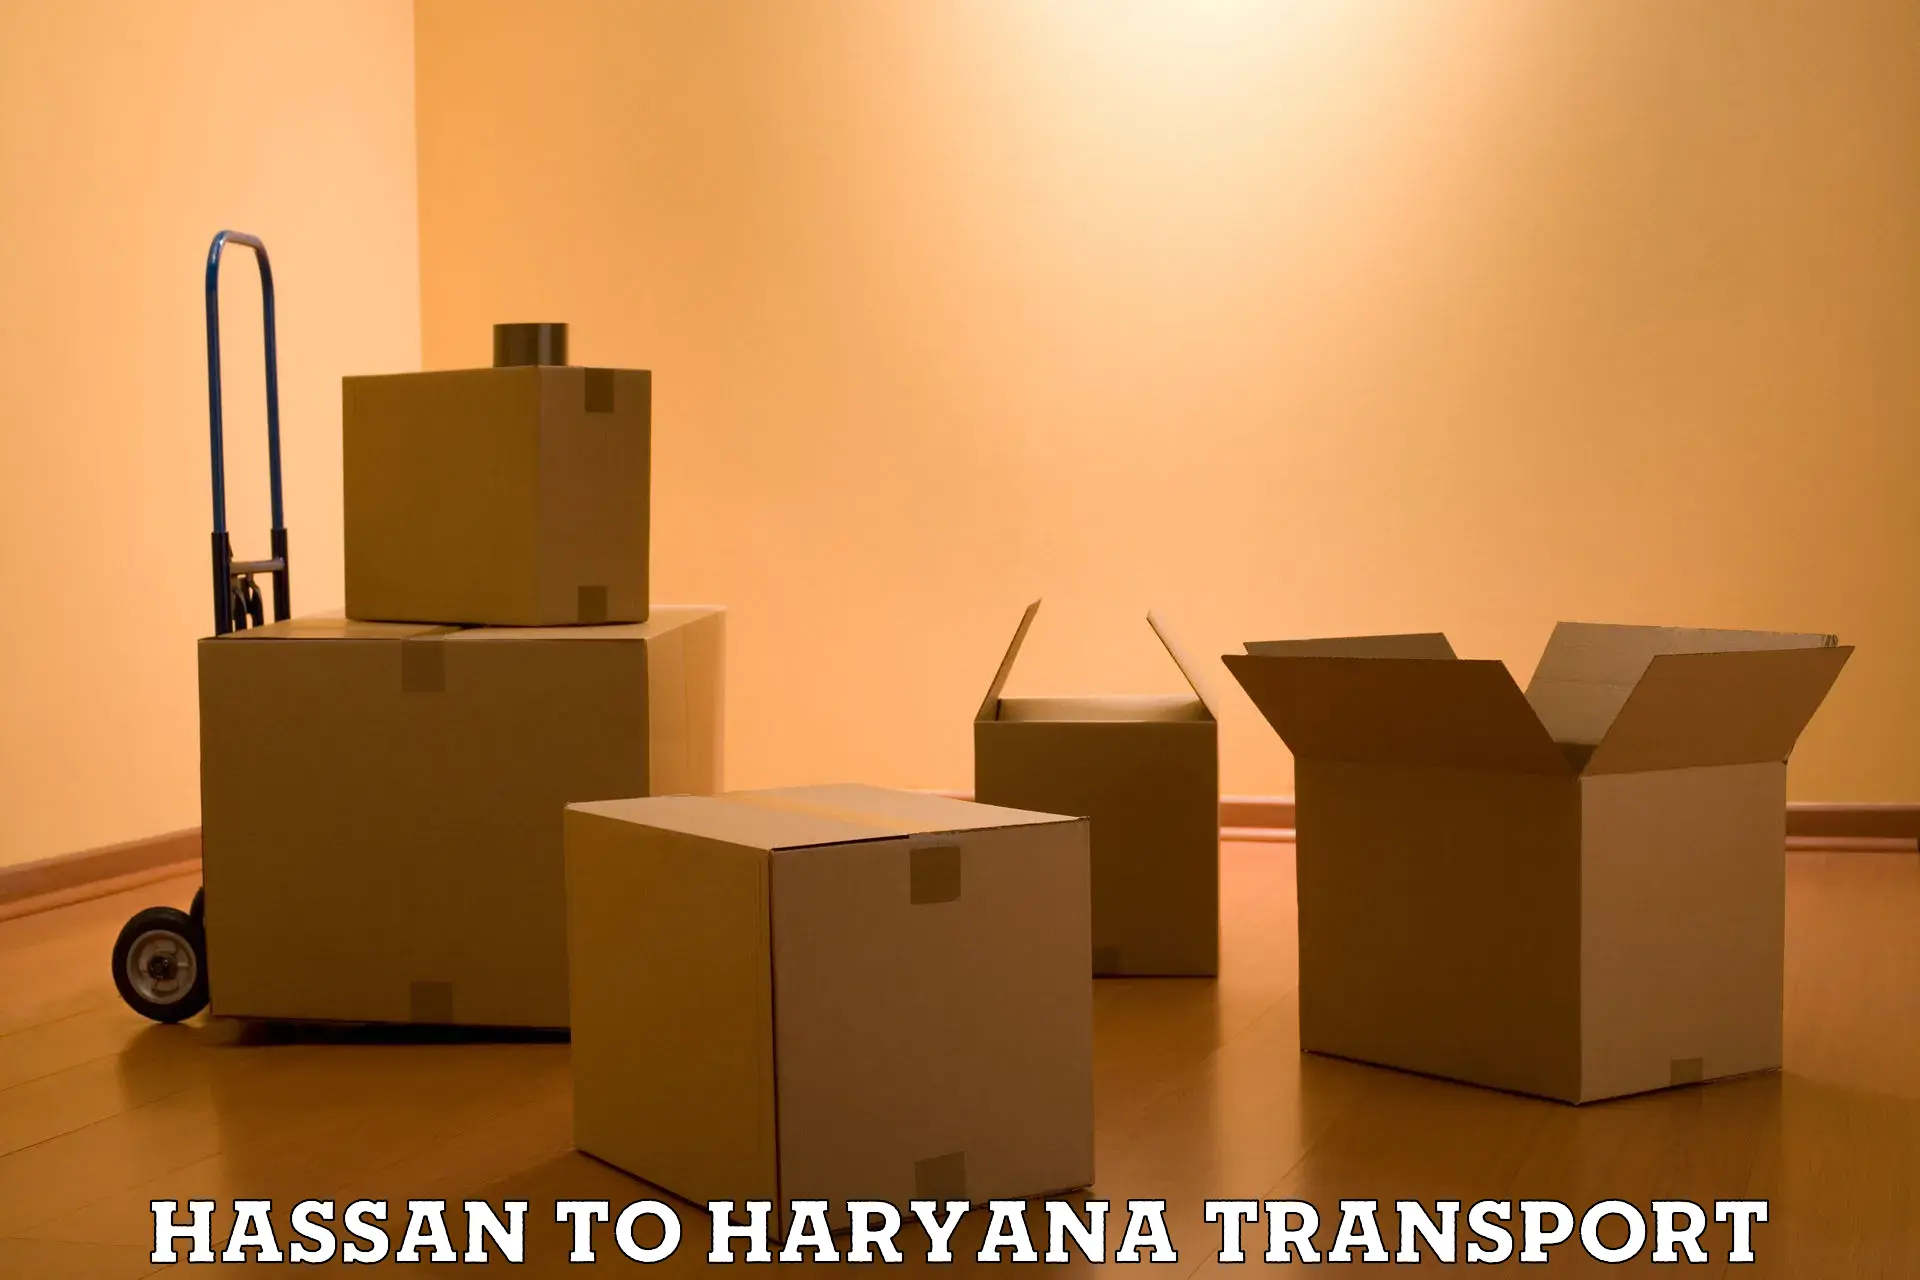 Nearby transport service Hassan to Haryana